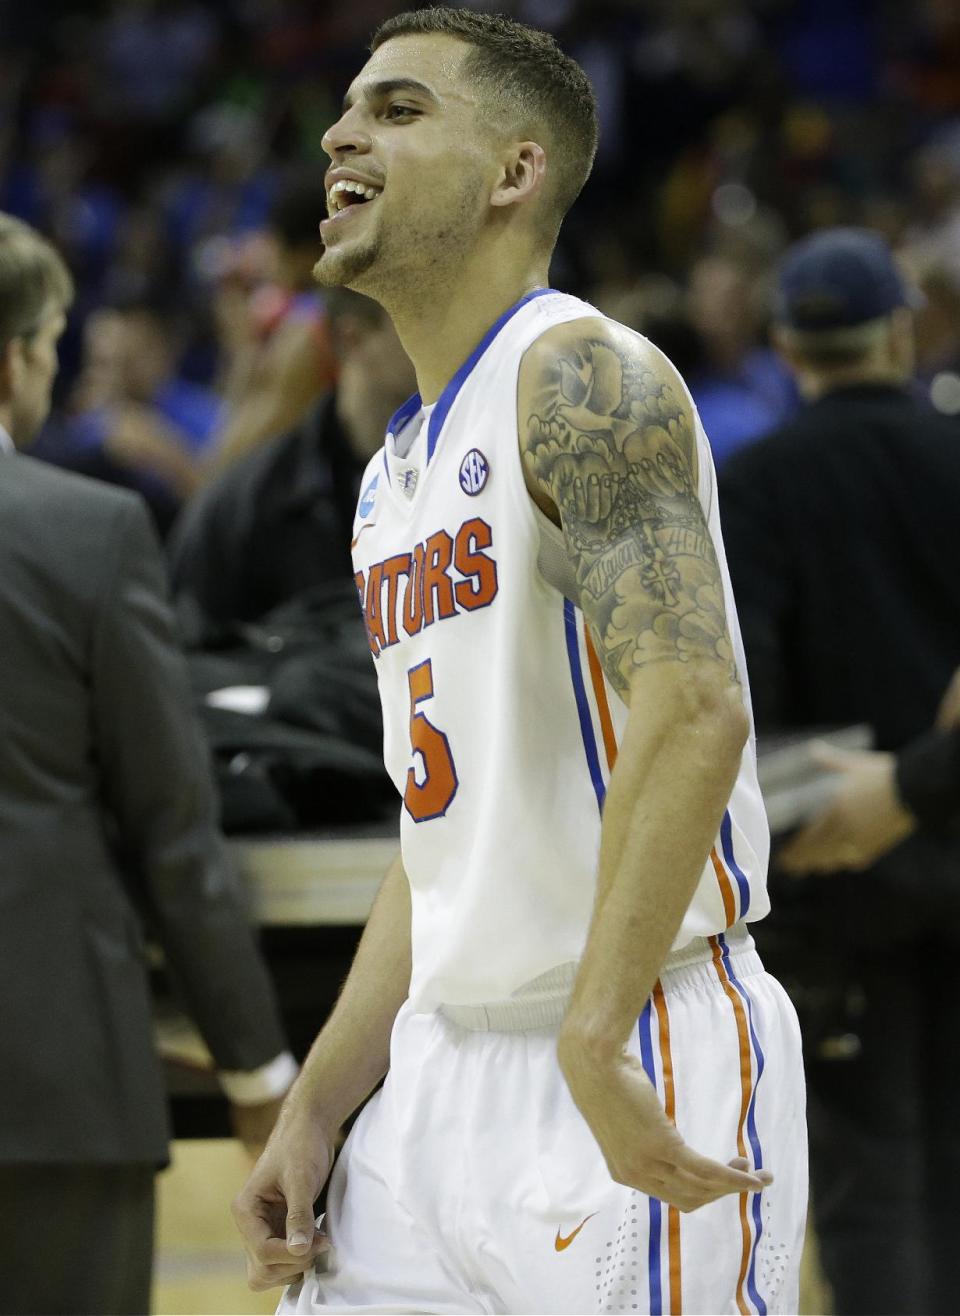 Florida guard Scottie Wilbekin (5) celebrates after the second half in a regional final game against Dayton at the NCAA college basketball tournament, Saturday, March 29, 2014, in Memphis, Tenn. Florida won 62-52. (AP Photo/Mark Humphrey)